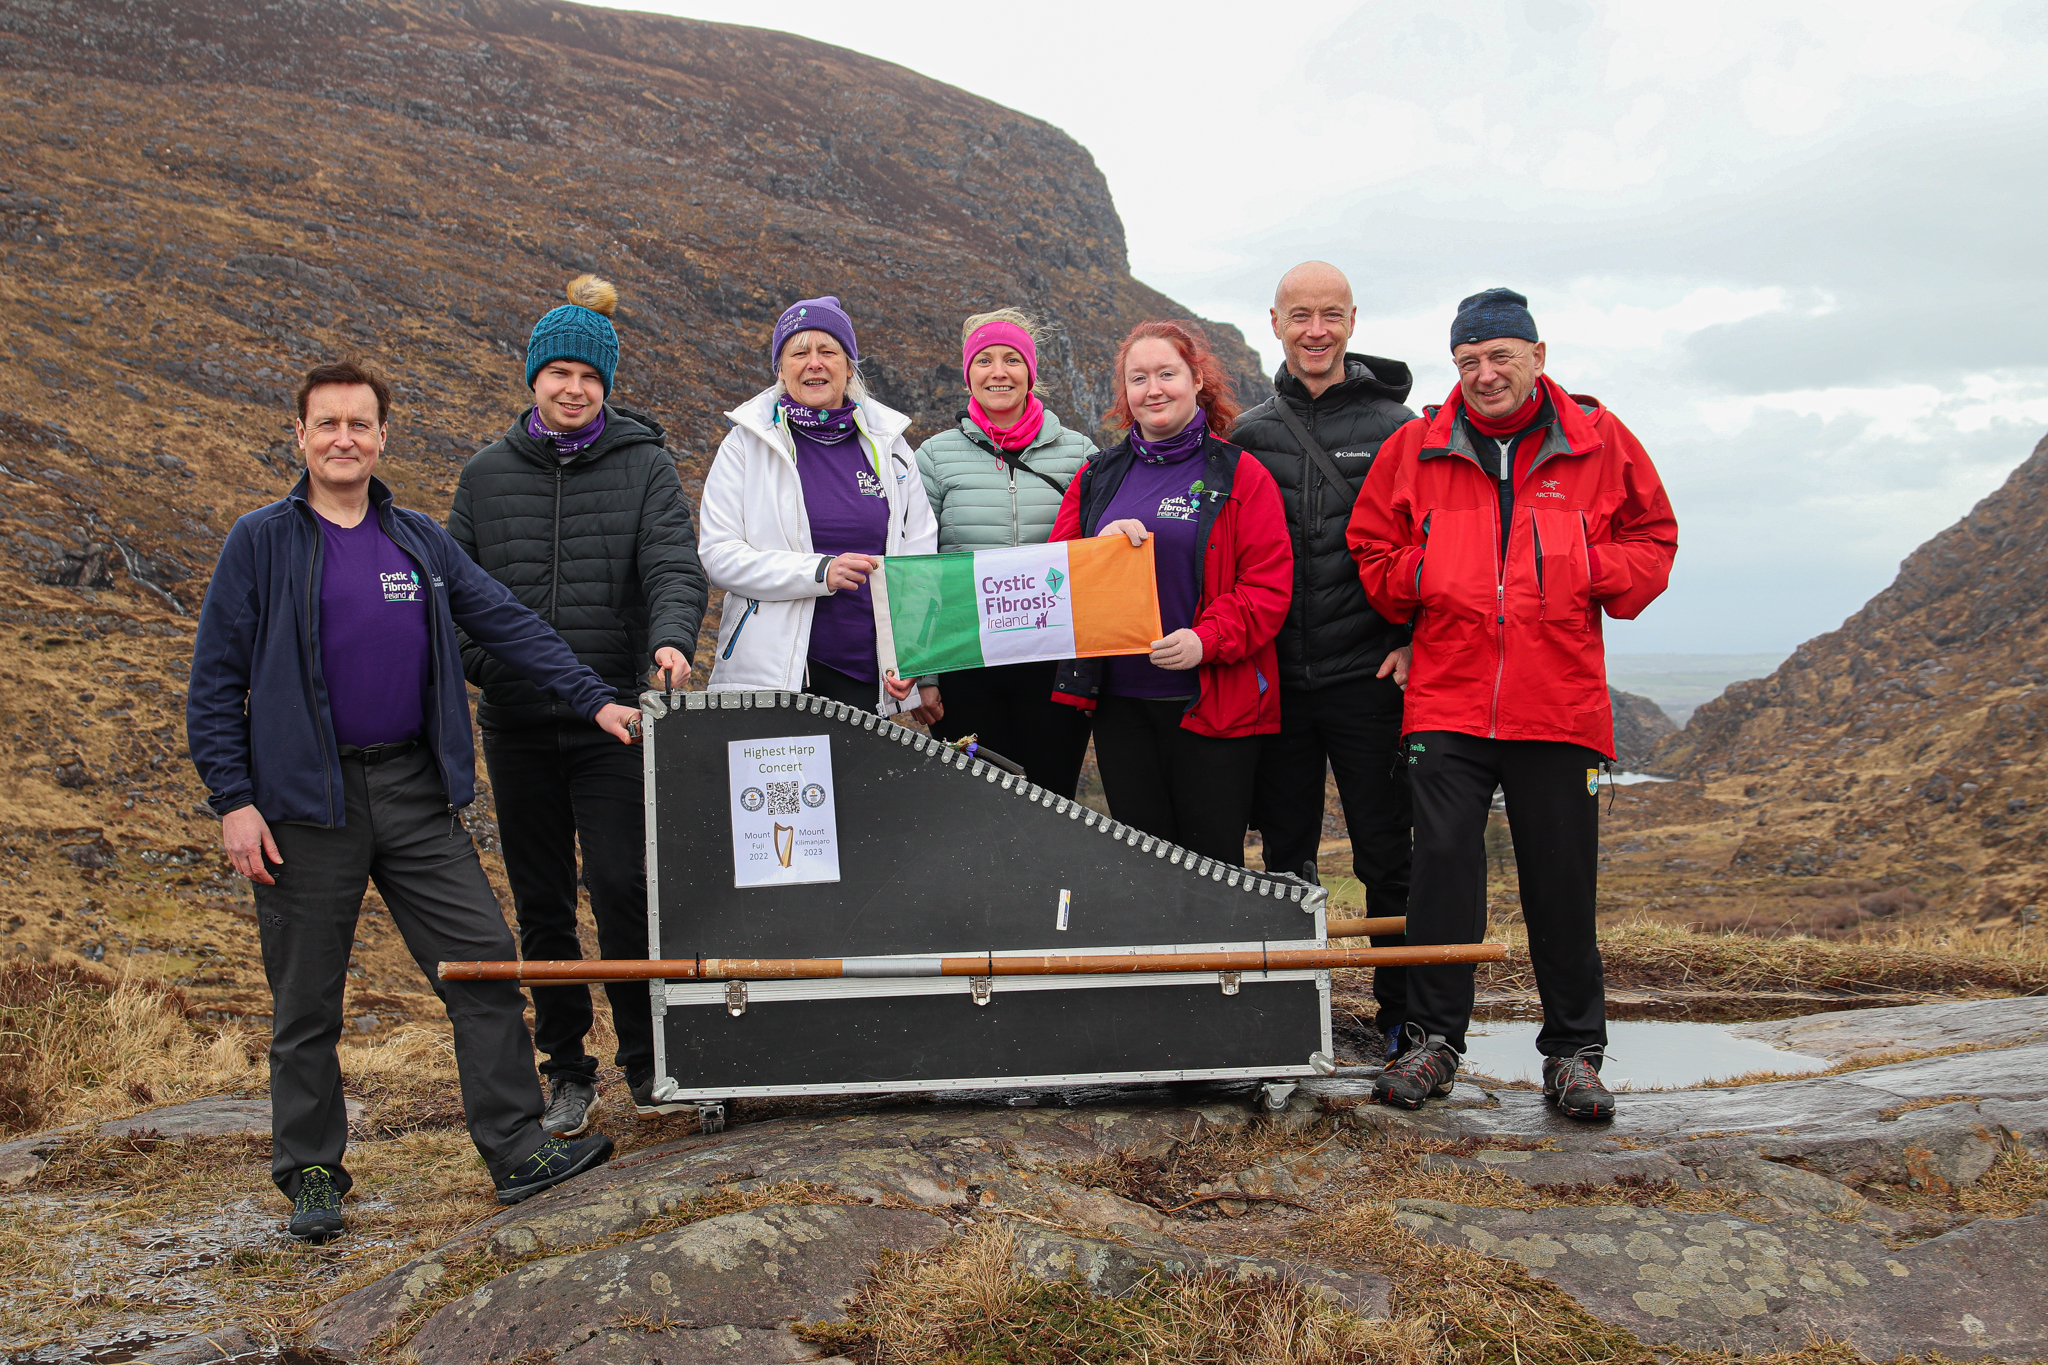 The Highest Harp Concert team during a training event on Ireland's highest peak, Carrauntoohil, in preparation for the Guinness World Record attempt on the 5,895m summit of Mount Kilimanjaro, Tanzania. Pictured are Sean Brady, Project Leader; Evan Murphy Cannon; Caroline Heffernan; Elaine Wall; Siobhan Brady, Harpist and Guinness World Record Holder; Stephen Lappin and Mountaineer and Expedition Leader, Pat Falvey.